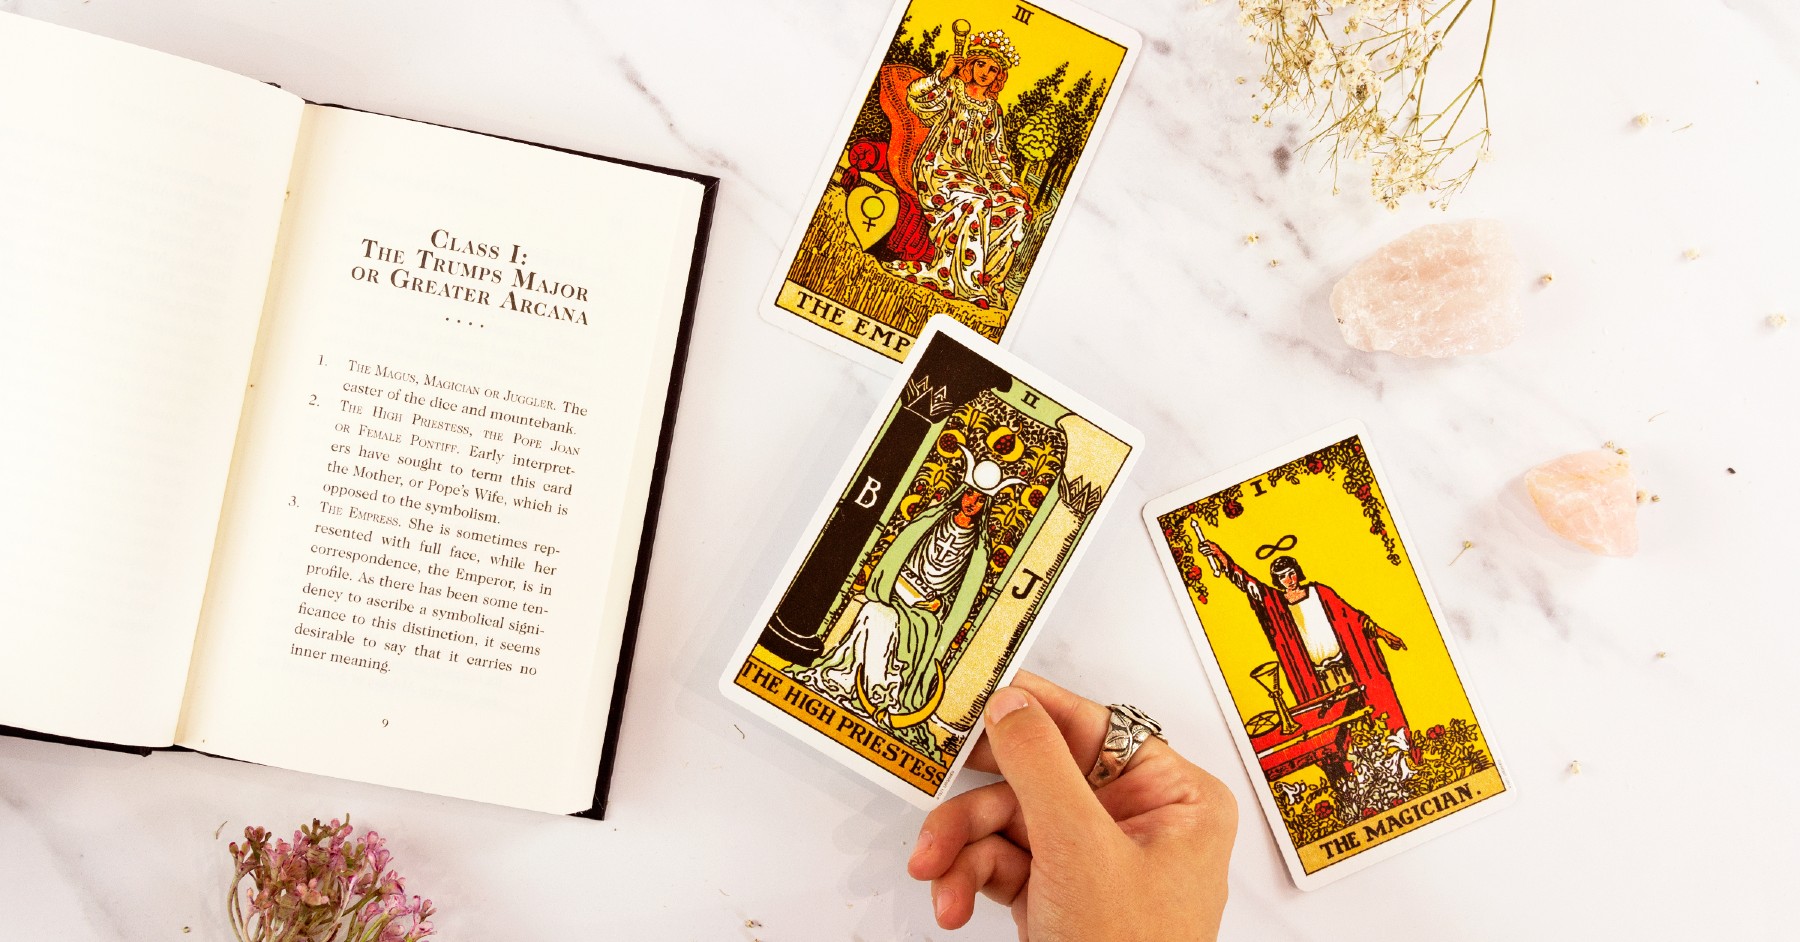 Cards pulled from the Rider-Waite tarot deck. Image: Penguin